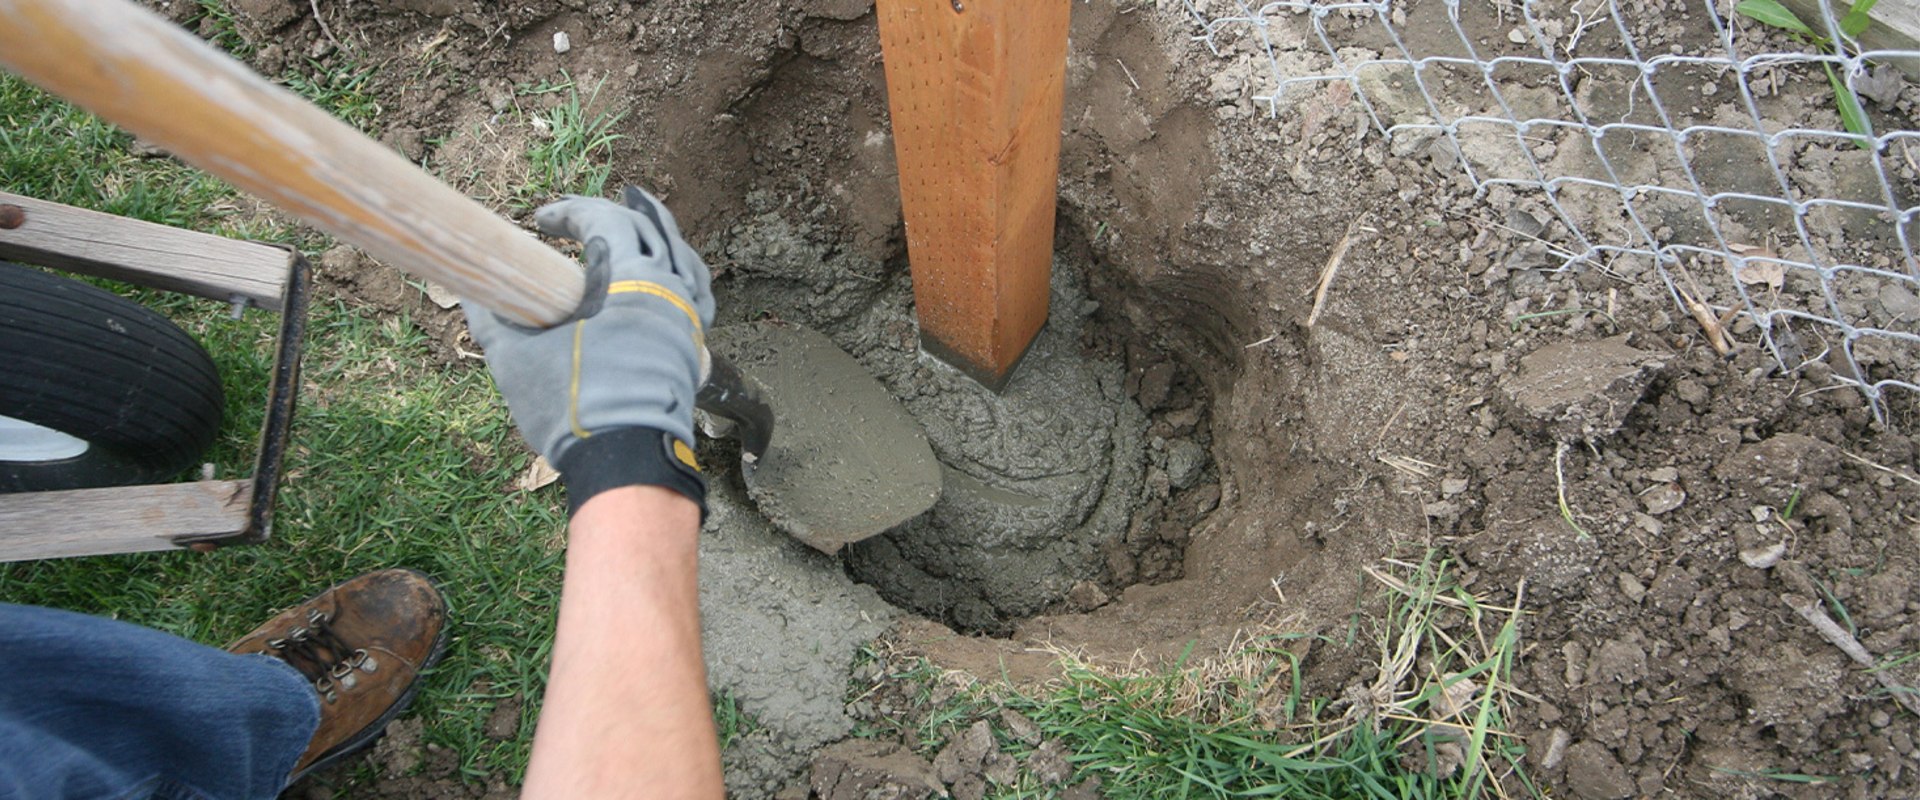 Do Concrete Poles Rot? An Expert's Guide to Lasting Fences